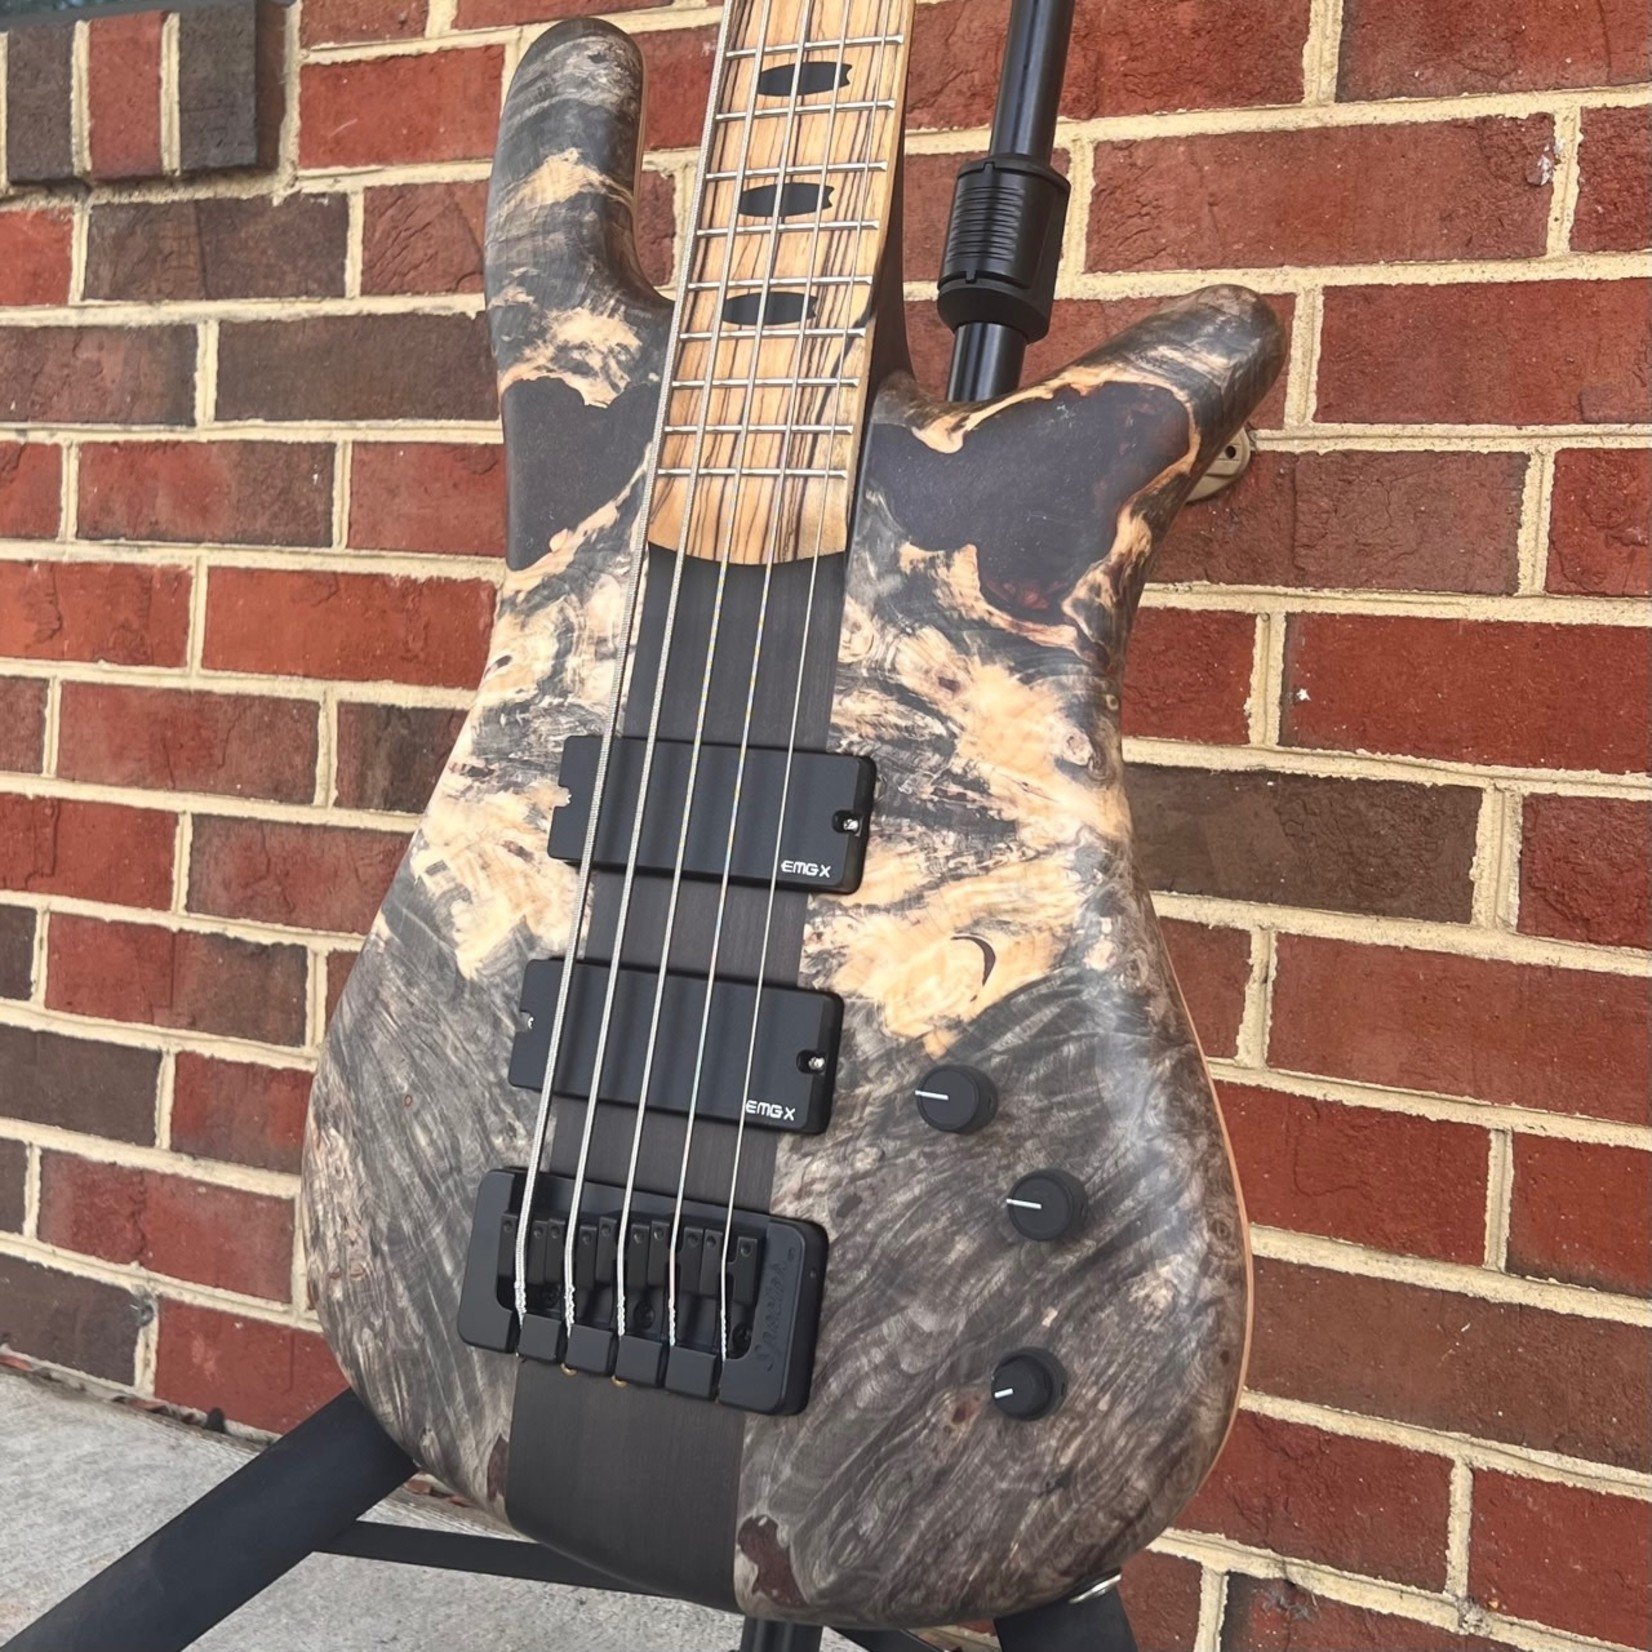 Spector Spector USA NS-5XL, Buckeye Burl Top, Swamp Ash Body - Weight Relieved, Roasted Maple Neck with Charcoal Stain, Pale Moon Ebony Fretboard, Matching Headstock, Pale Moon Ebony Logo and Truss Rod Cover, EMG 40DCX, Spector HAZ 18-volt, TSA Case